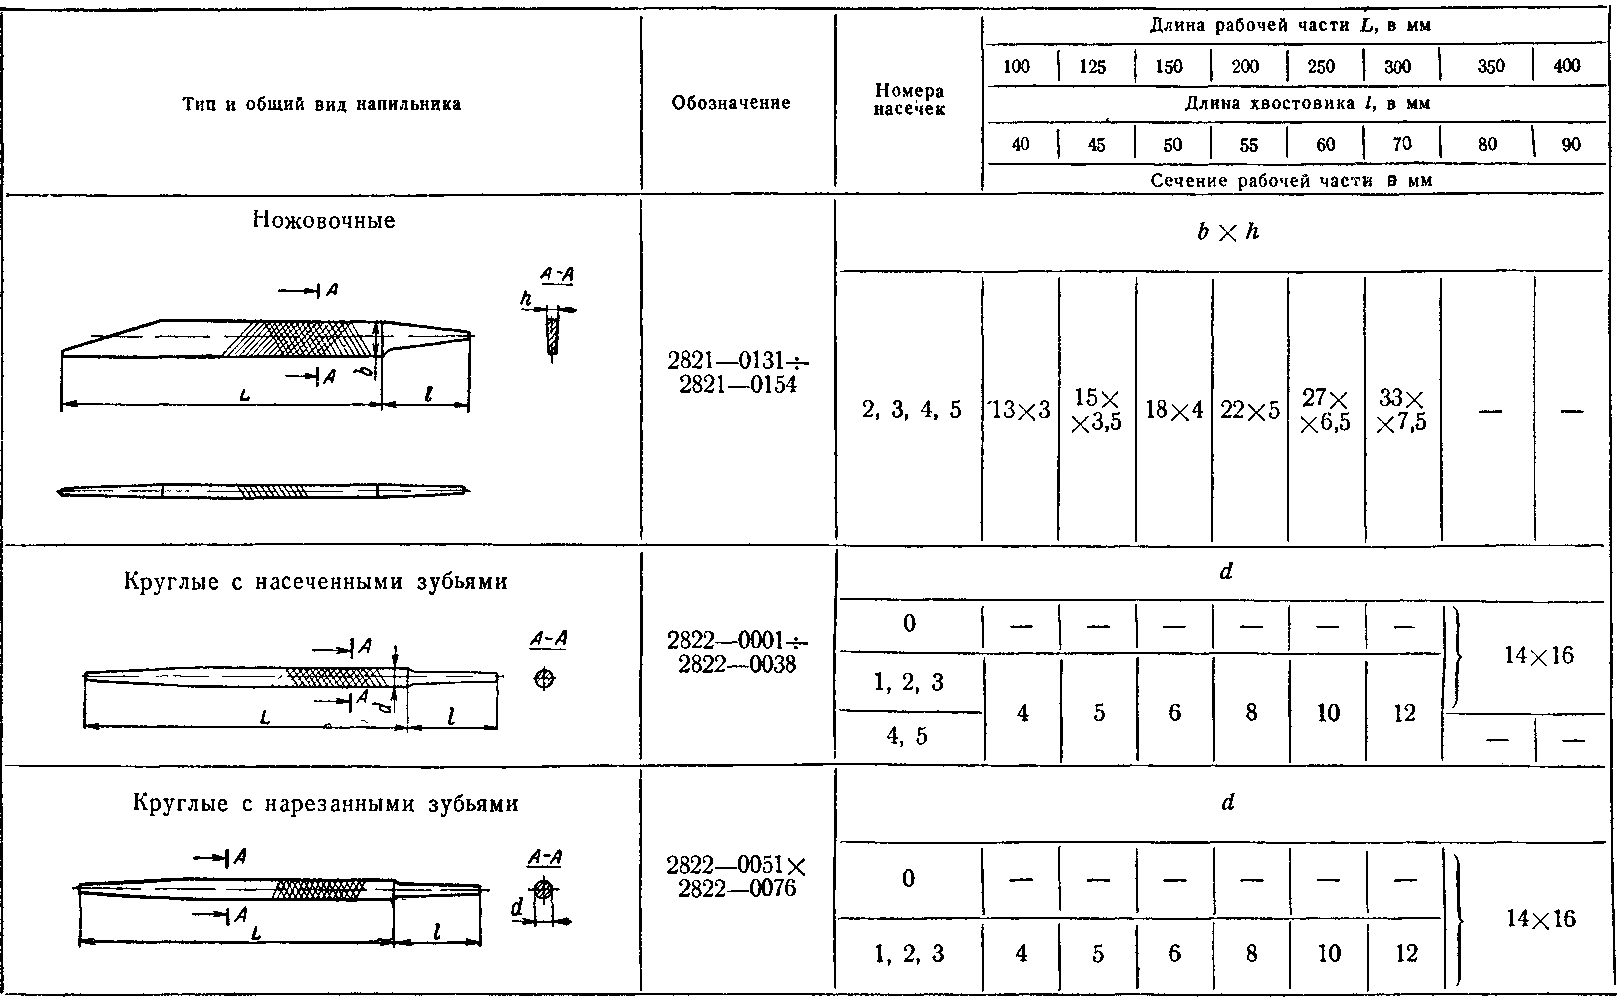 Types of files (table)